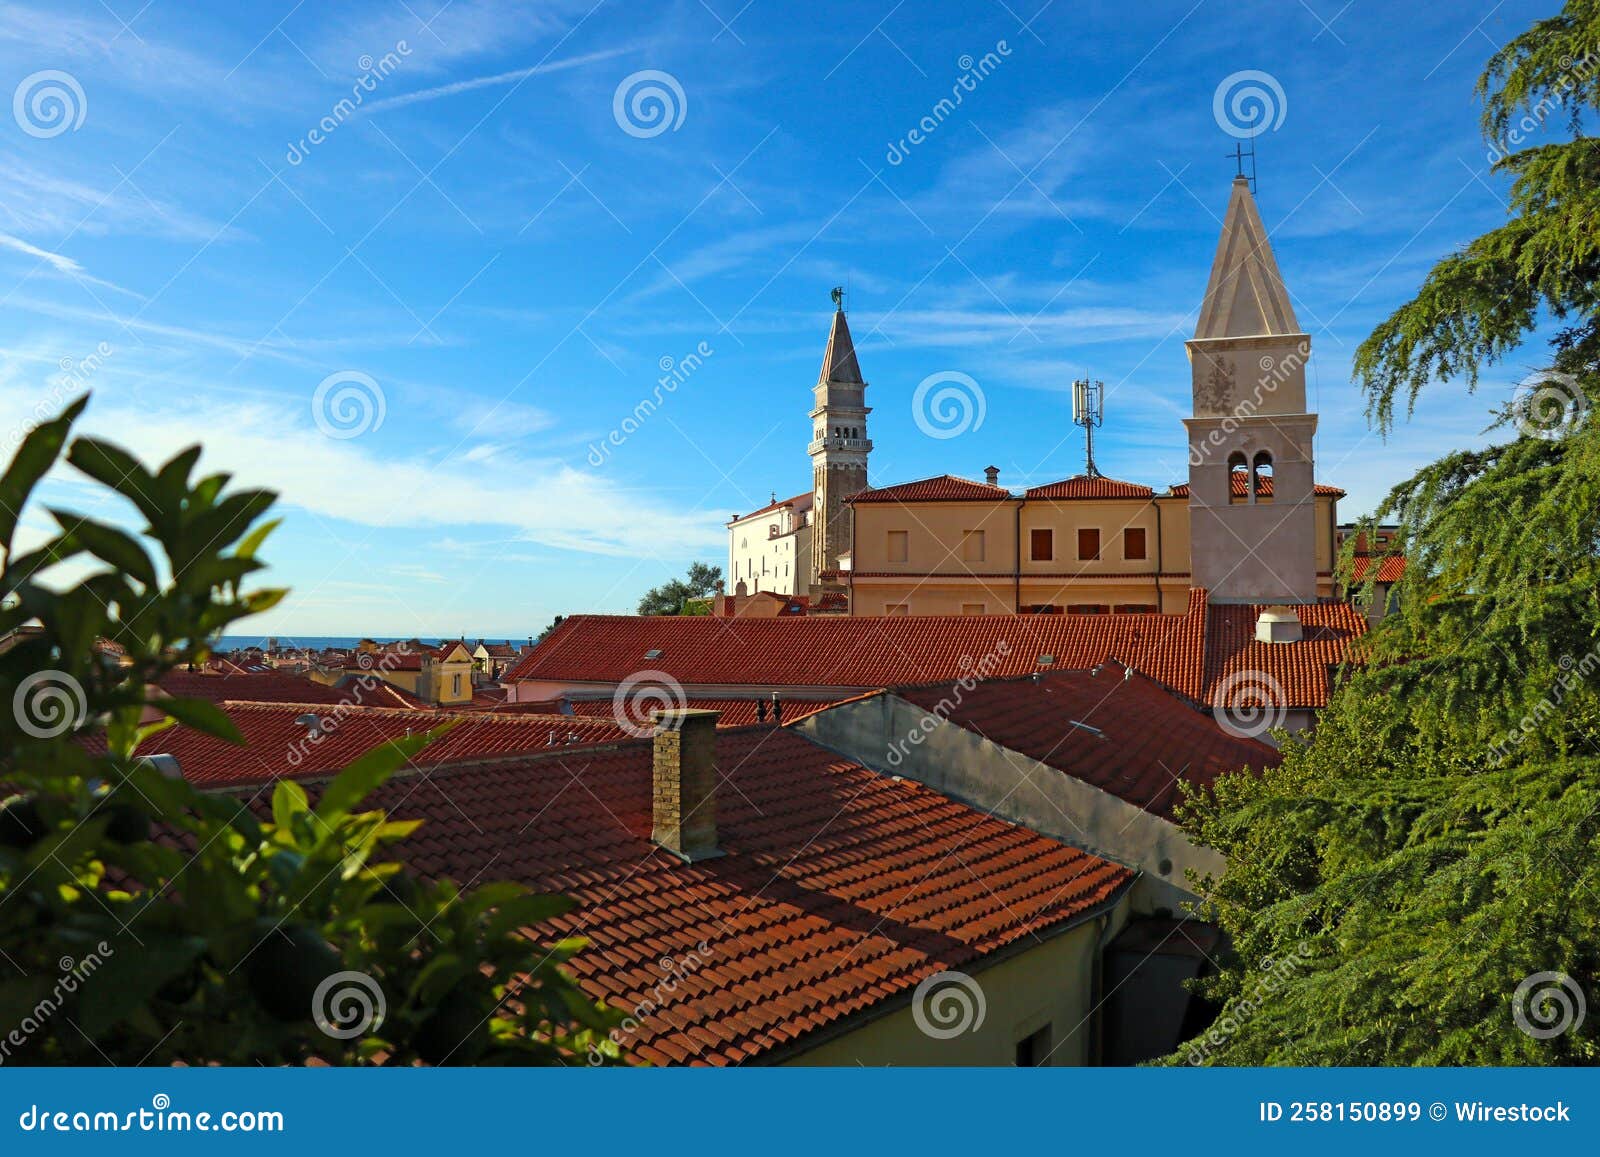 buildings and trees in the city of piran, eslovenia with a church and a blue sky in the background.